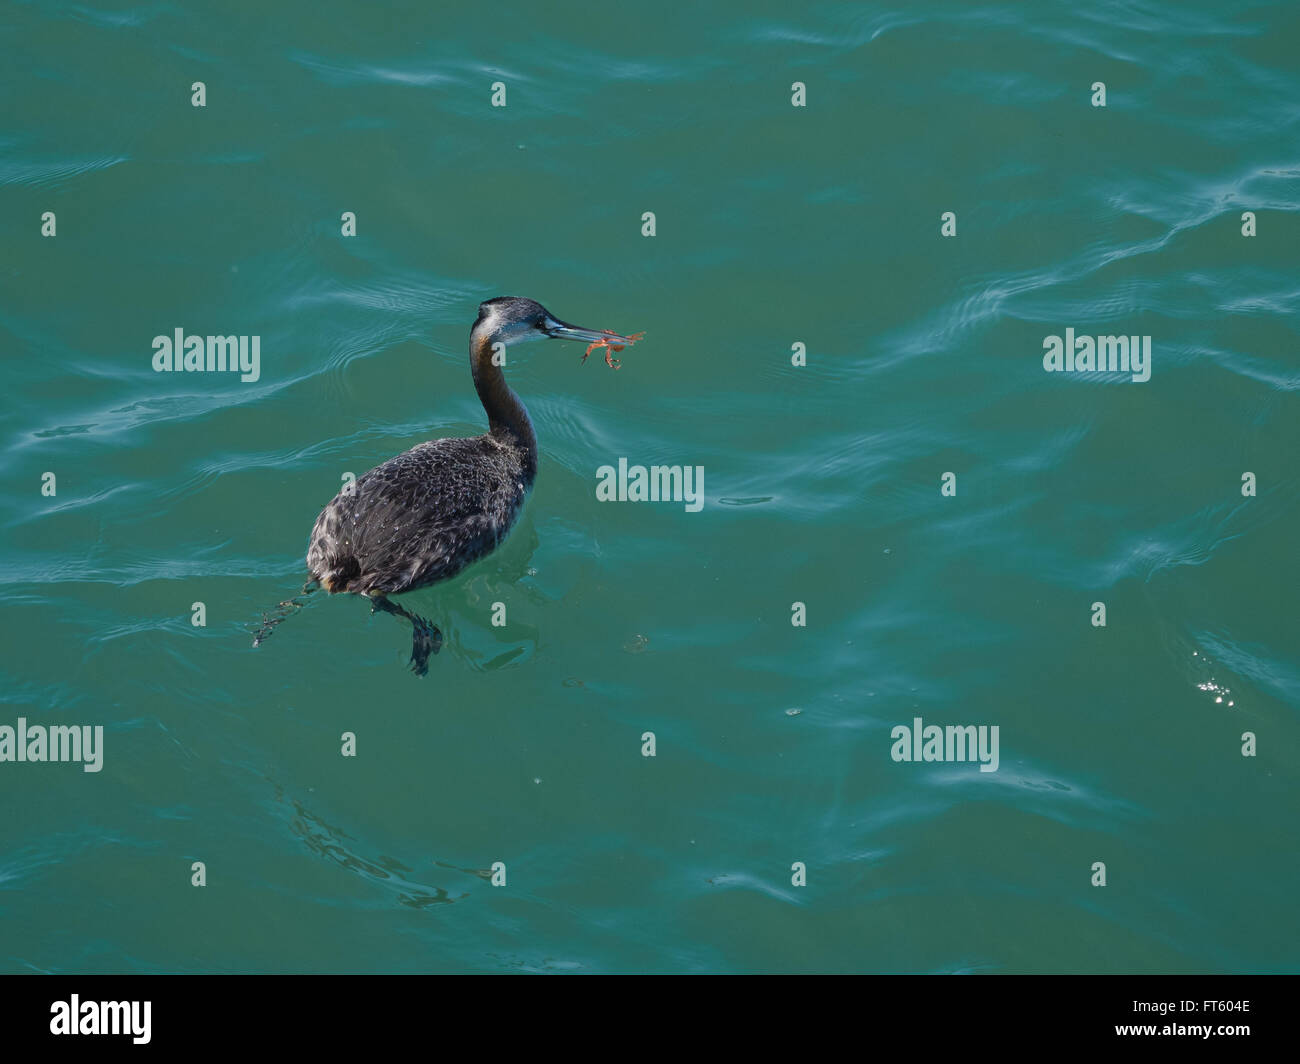 Great grebe, Podiceps Major. Seen in the wild at Puerto Madryn Argentina. Stock Photo